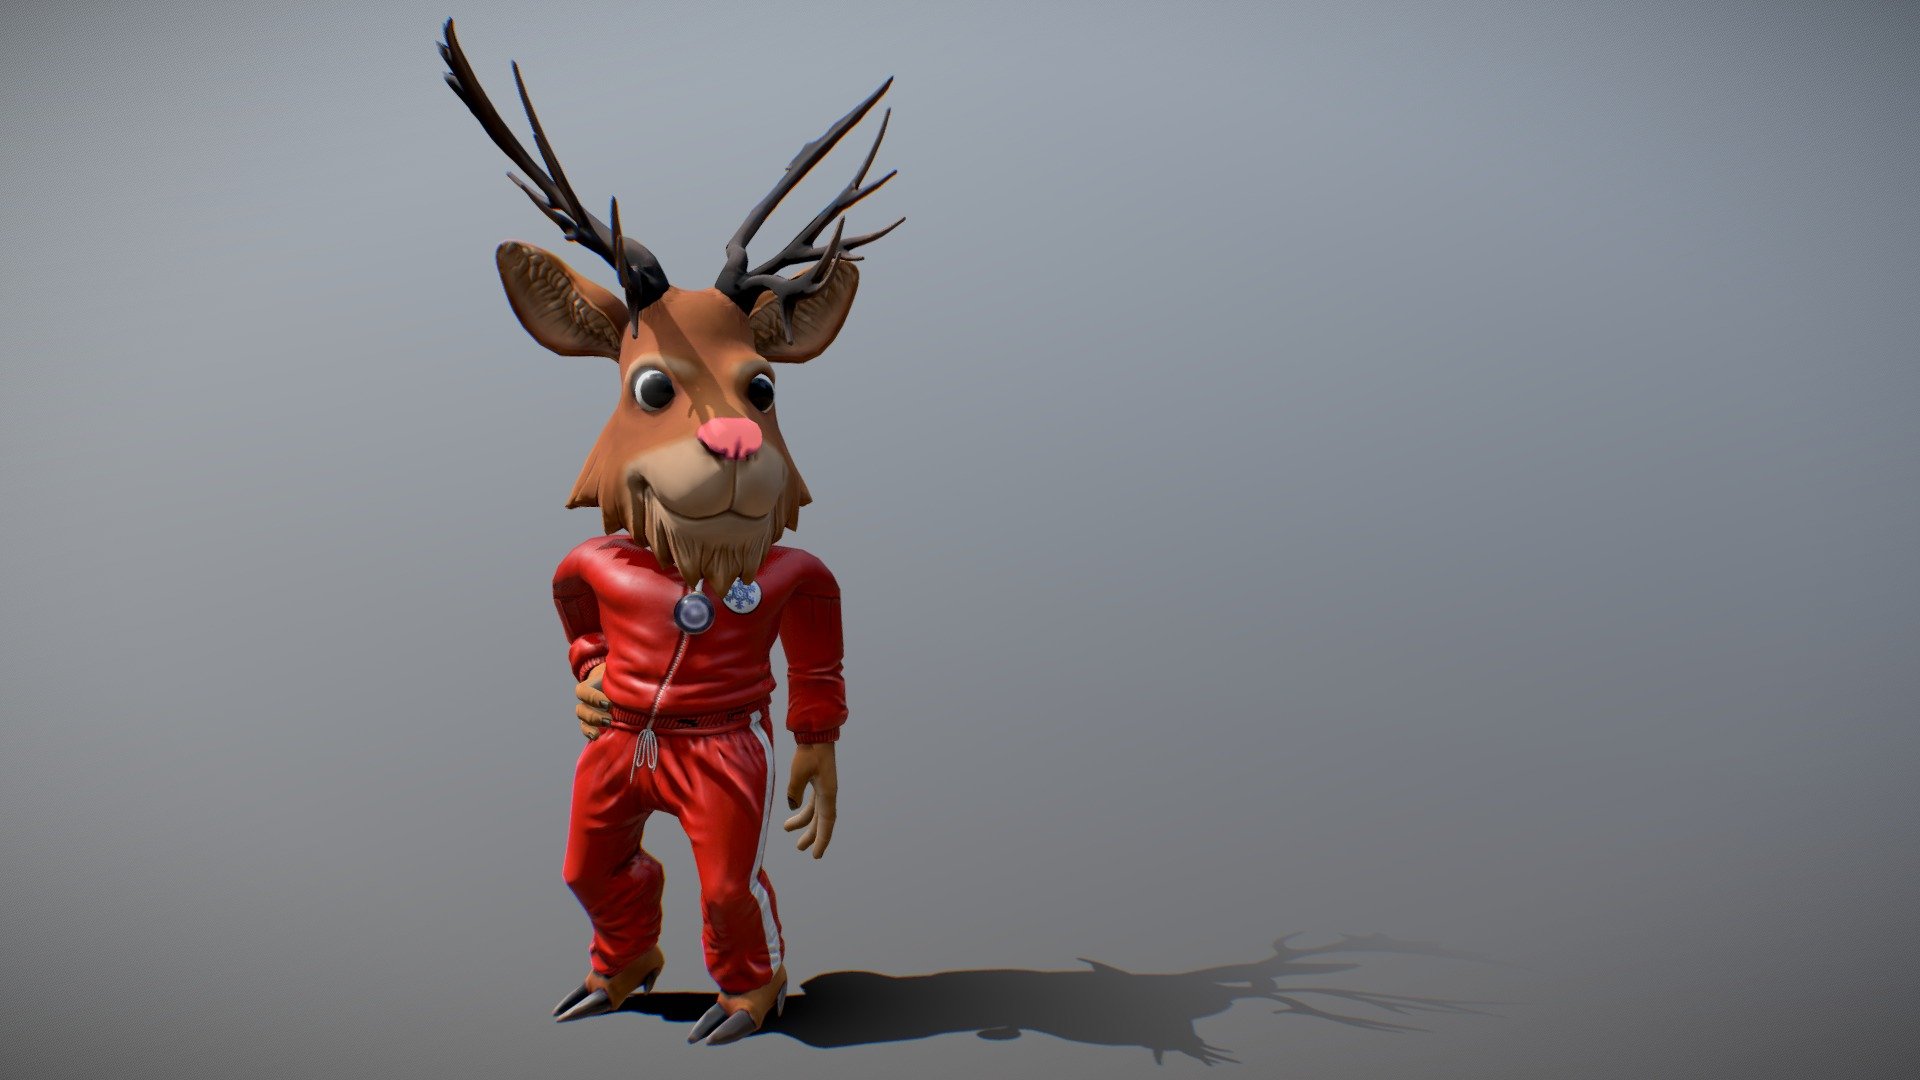 A mysterious Alien you'll can meet in Ketch'Up &amp;amp; May'O

buy the 3d printing figurine here
https://www.myminifactory.com/fr/object/3d-print-rudolf-the-deer-of-santa-claus-145144

support me on patreon
https://www.patreon.com/MithrilFactory - Rudolphe Coach de Noël - 3D model by BlackantMaster 3d model